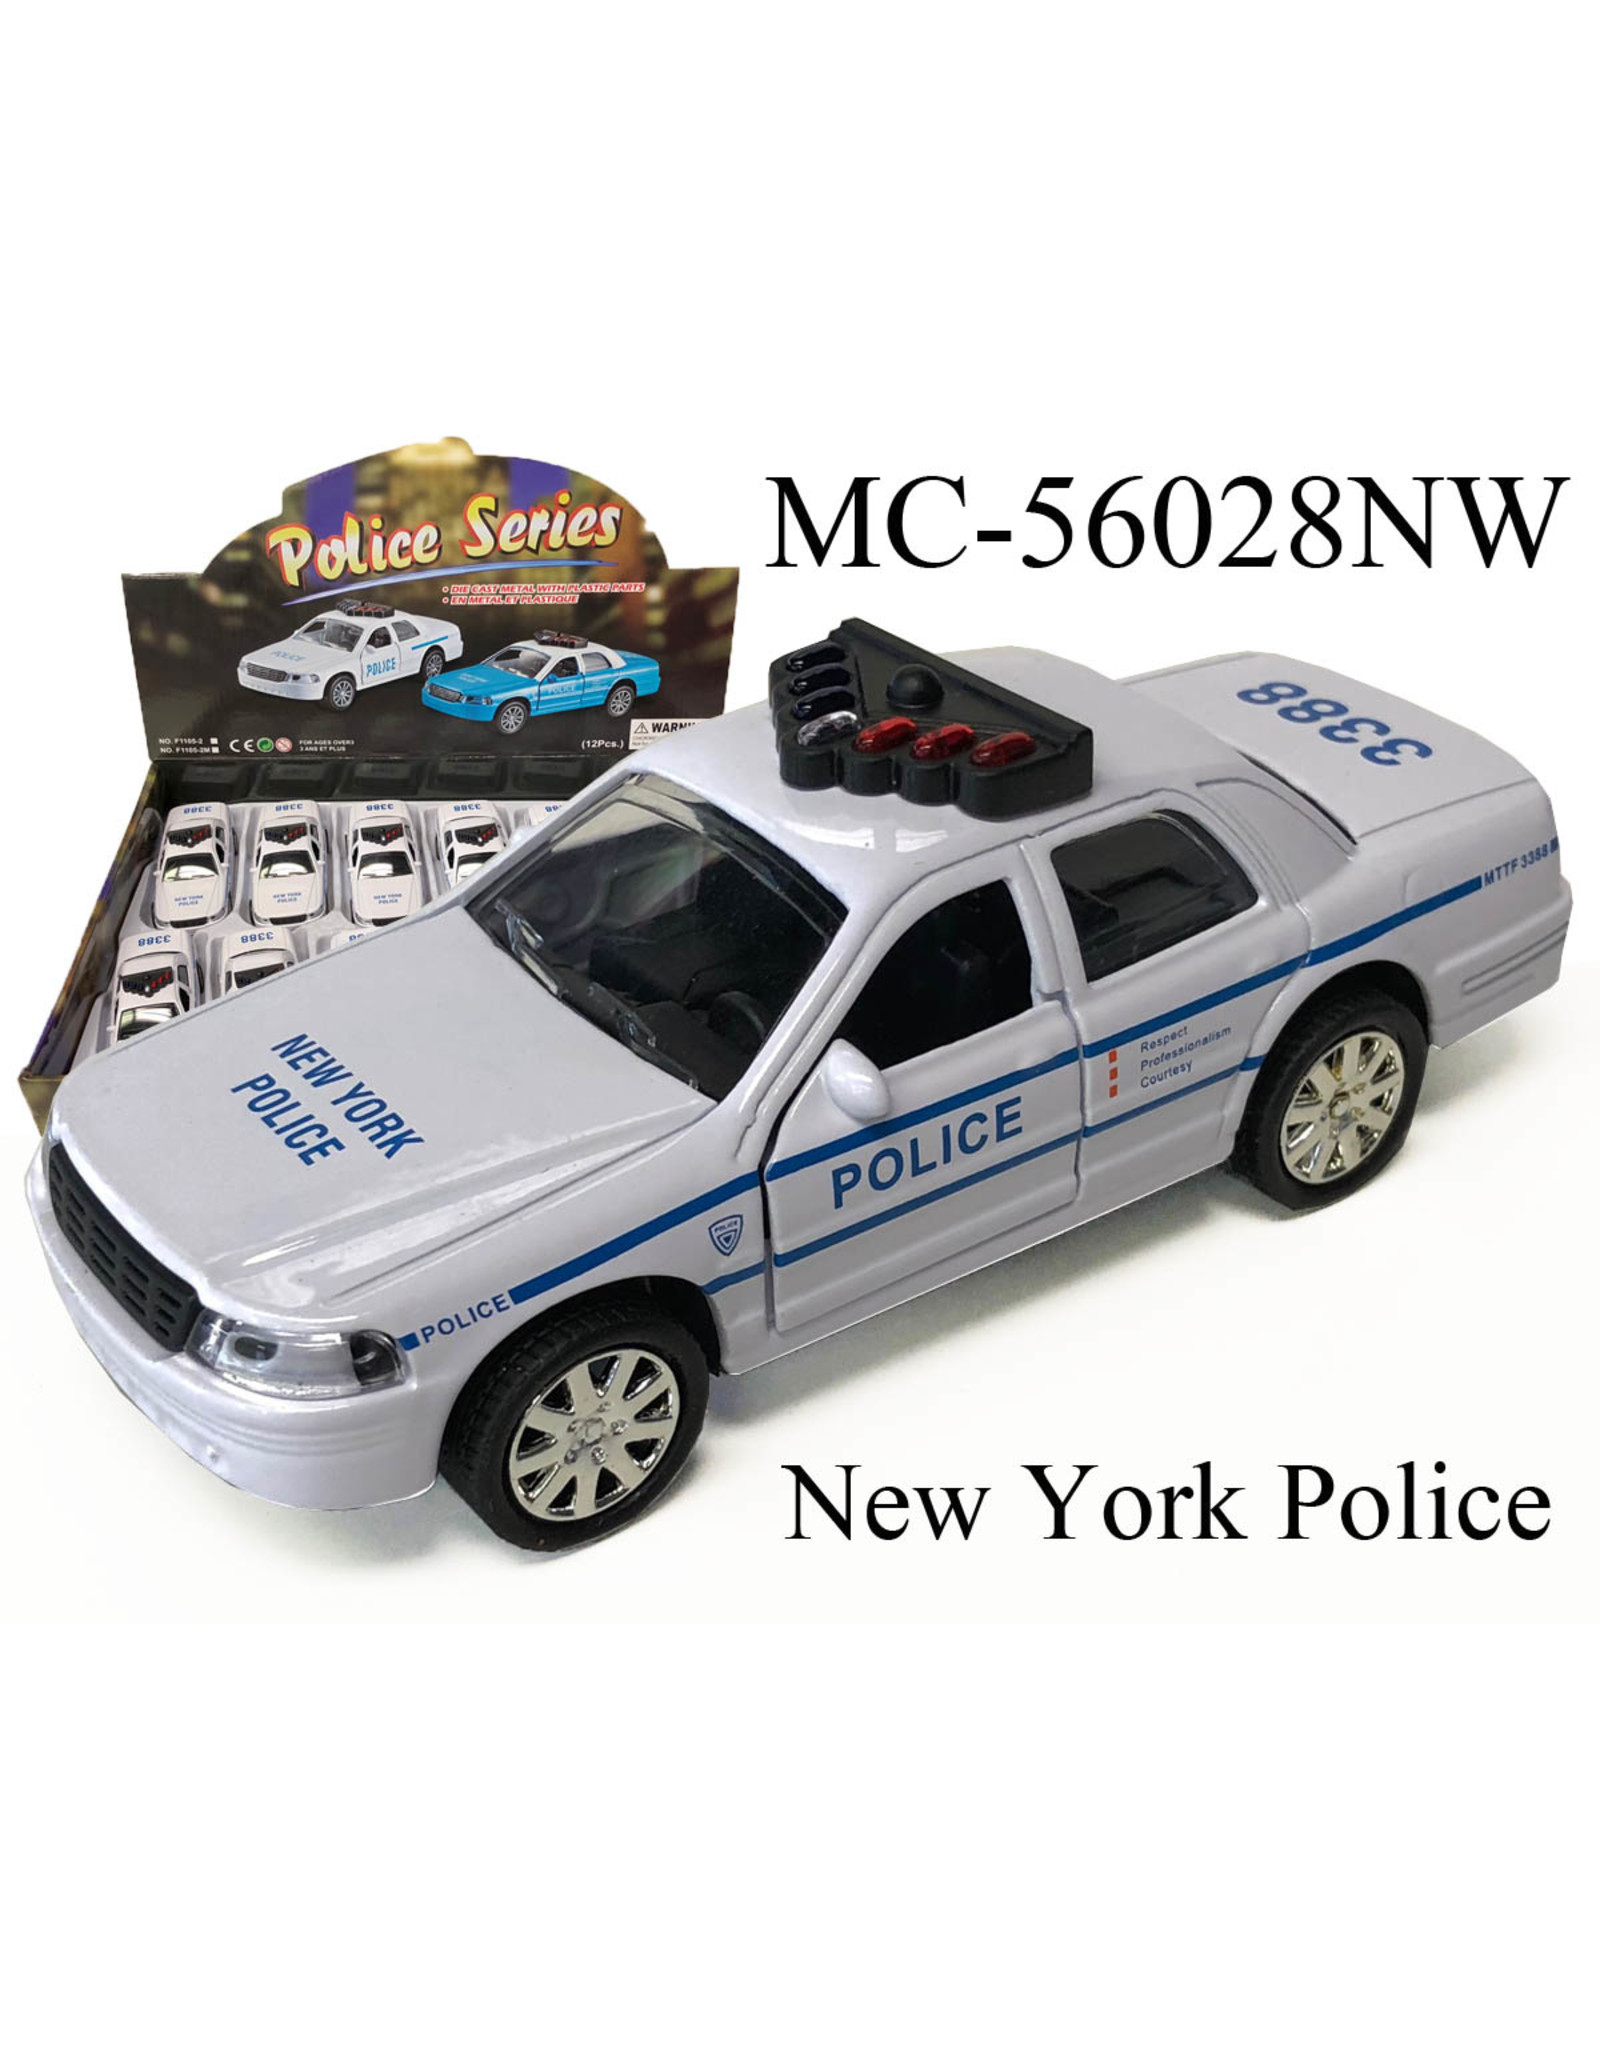 Police Series White - NYPD